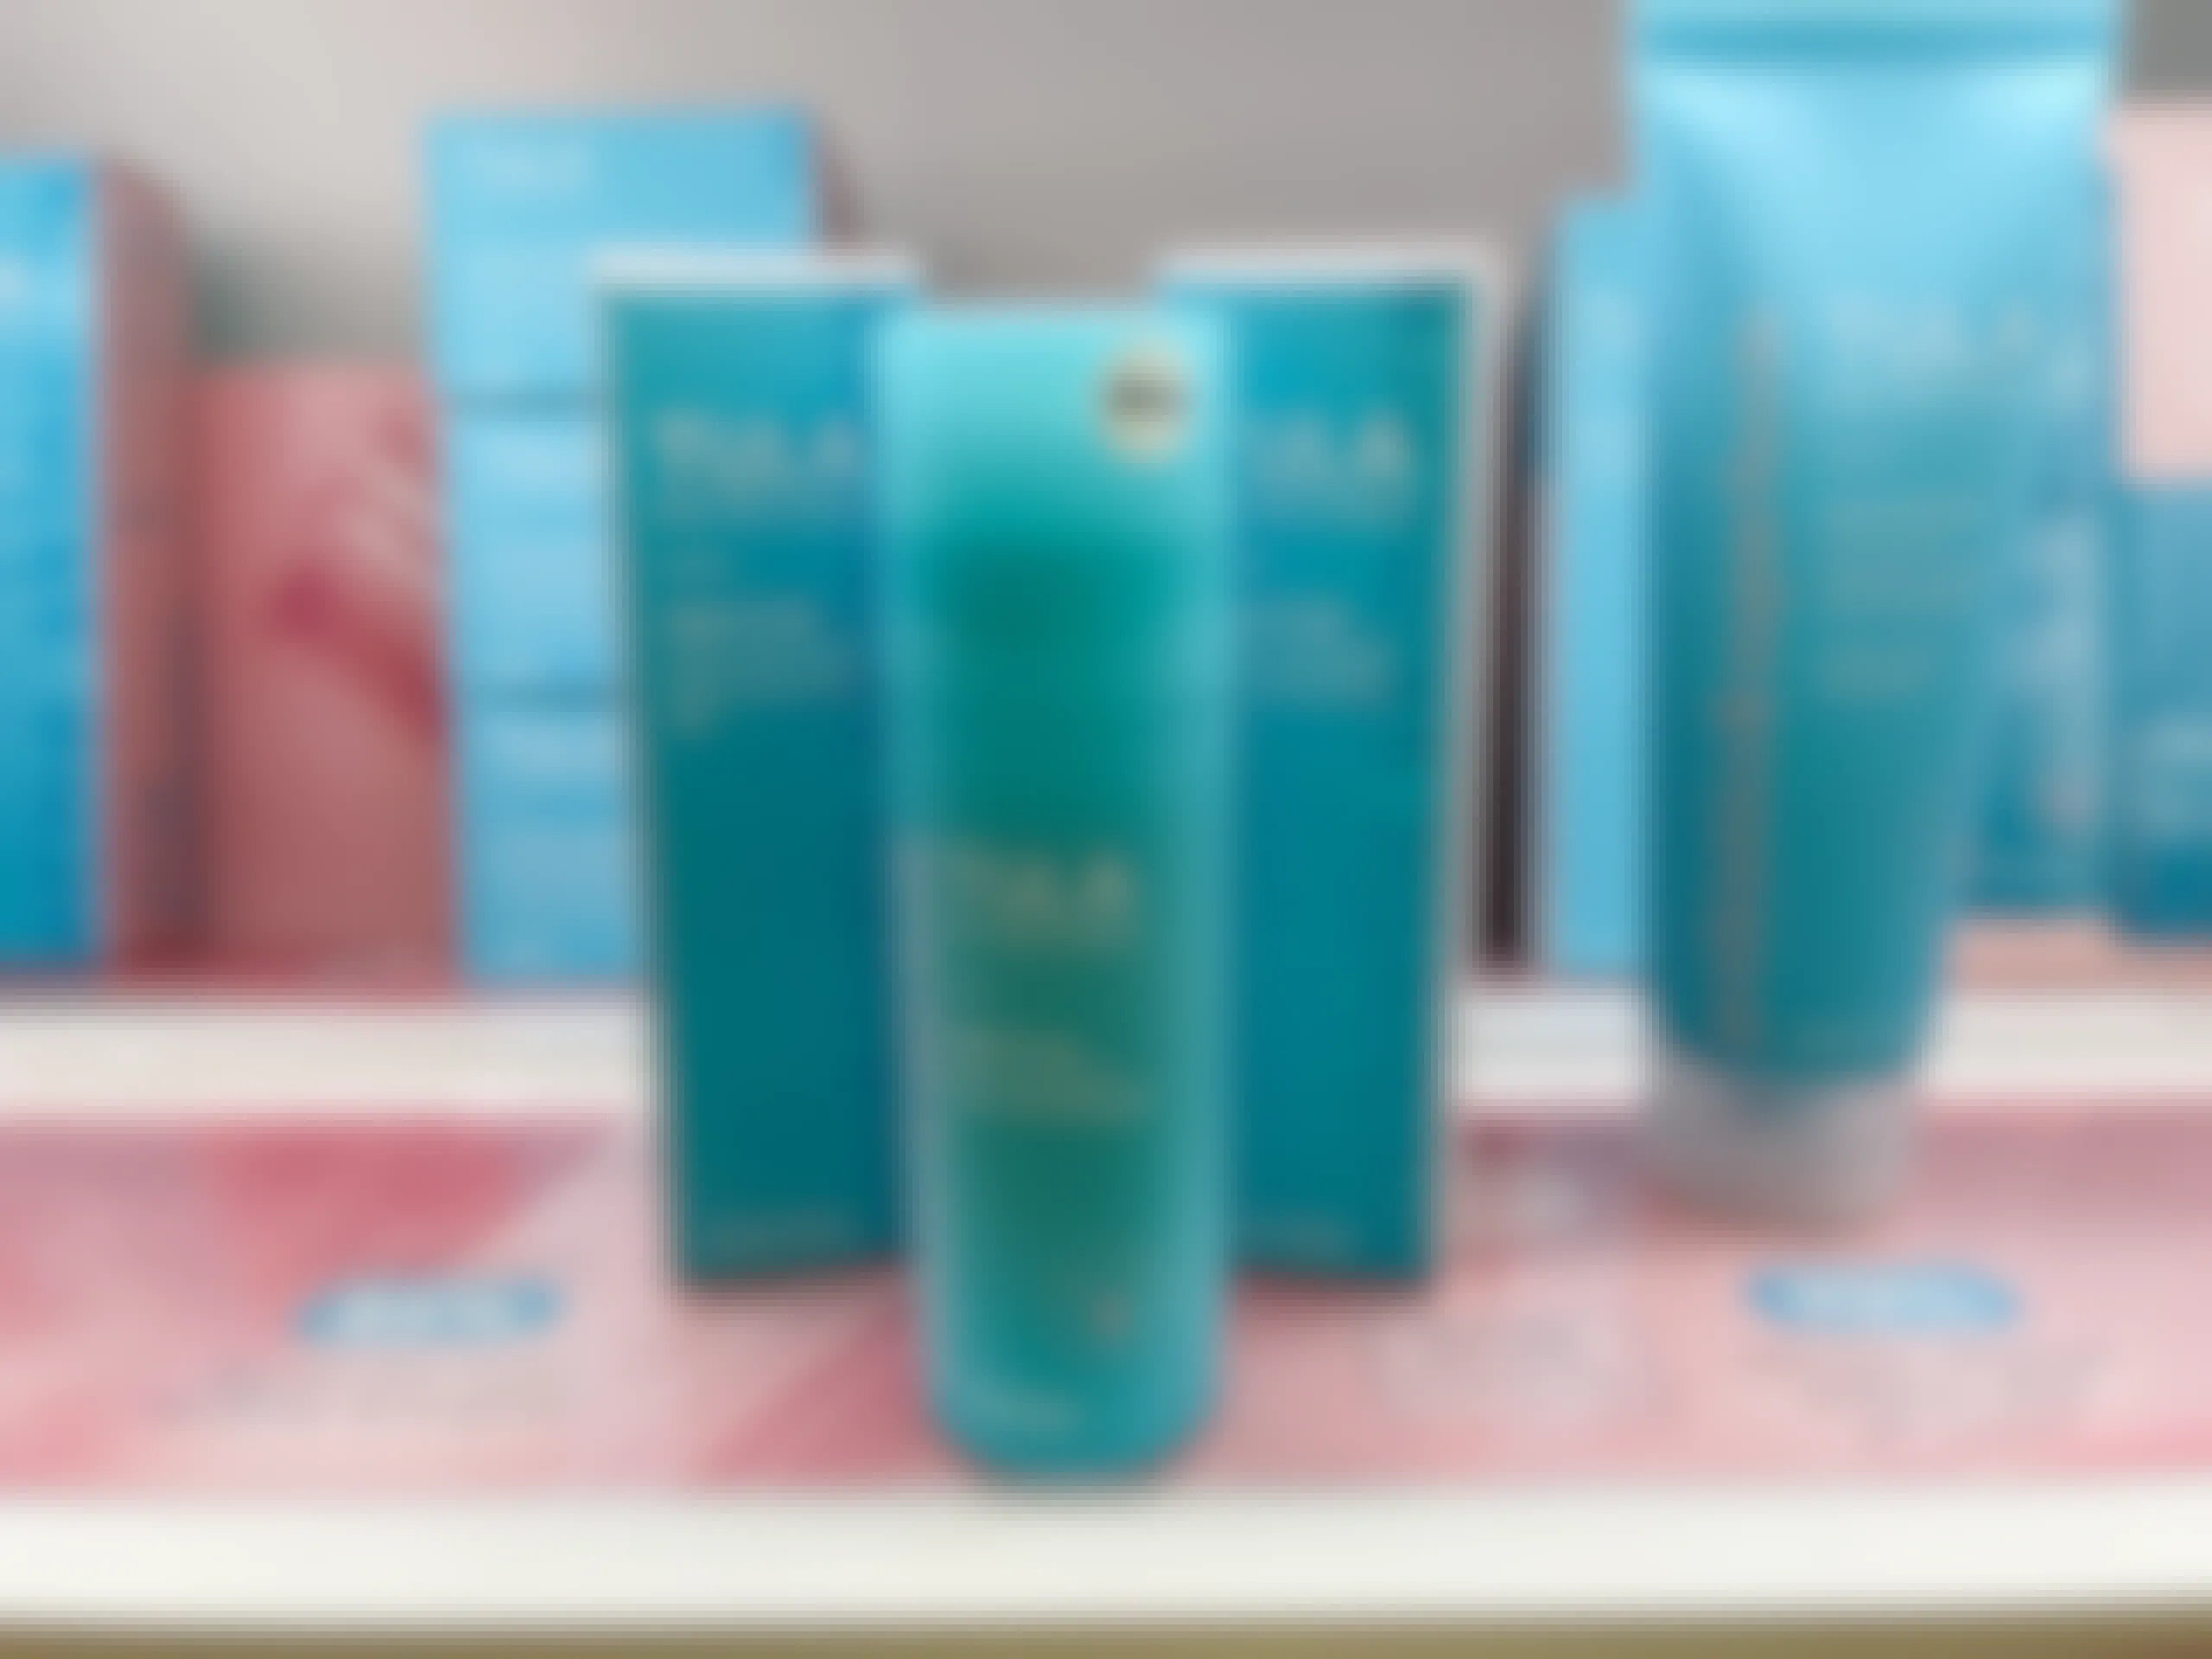 A bottle of Tula skincare clear it up acne clearing and tone correcting gel sitting on a store shelf with two boxes of Tula skincare clear it up acne clearing and tone correct in gel behind it.